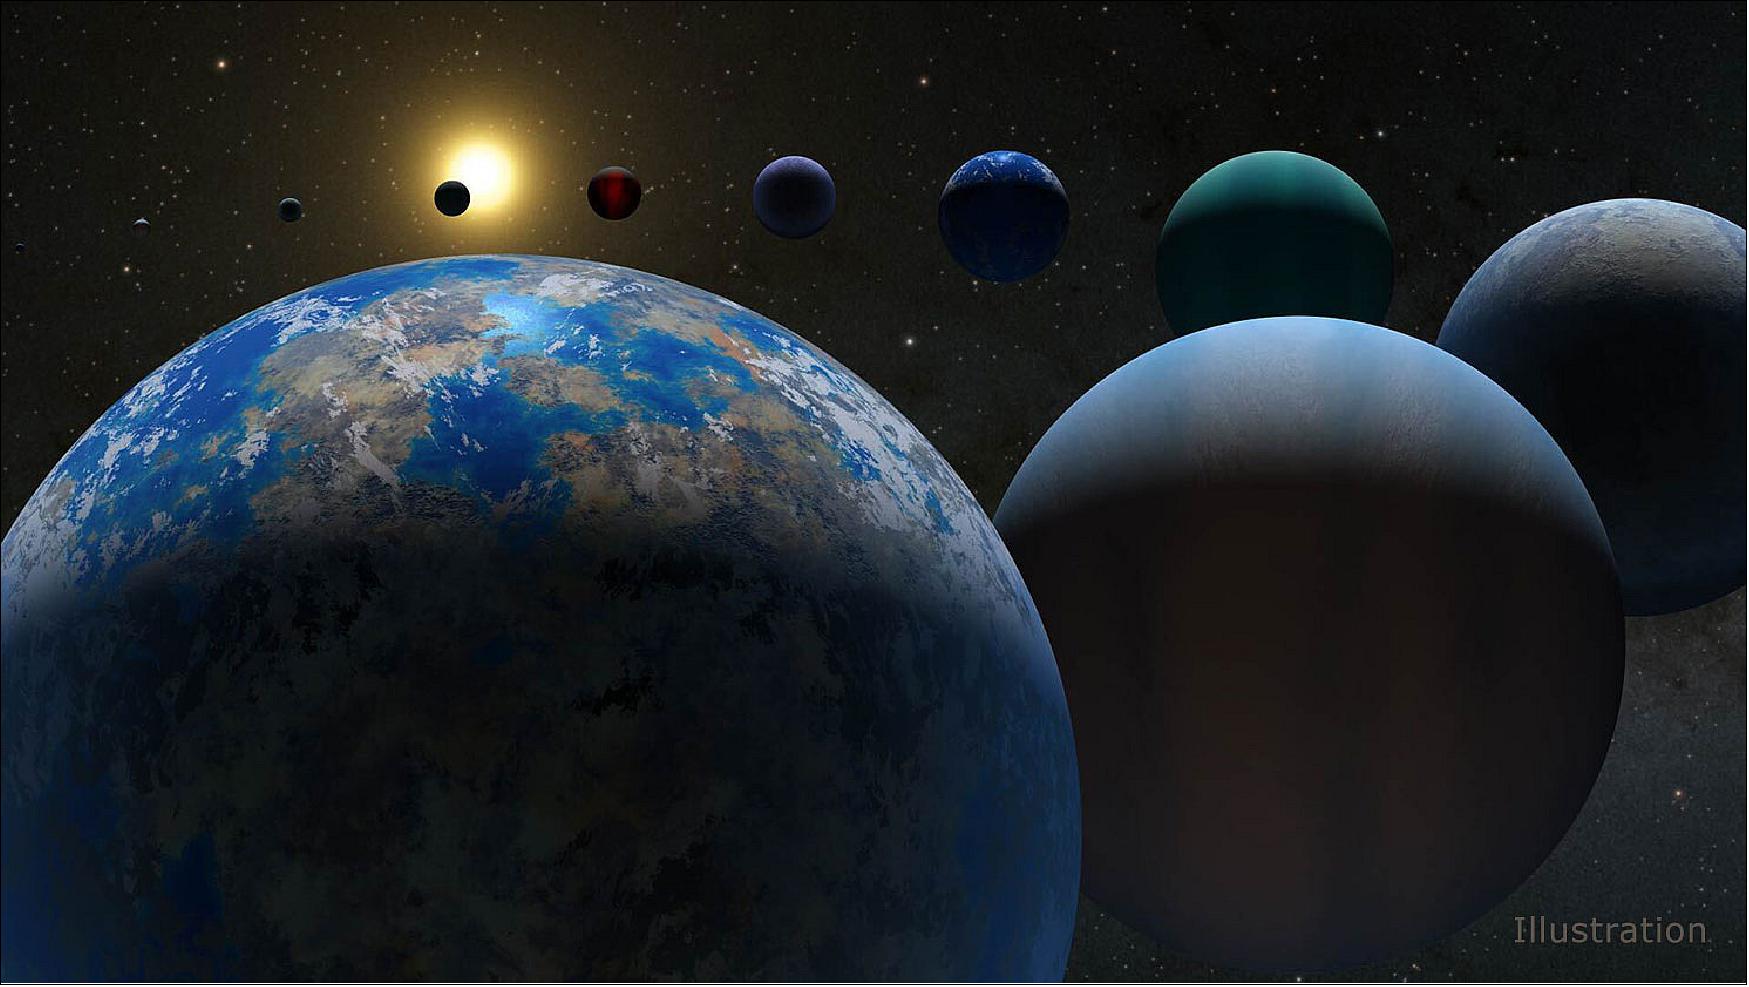 Figure 11: What do planets outside our solar system, or exoplanets, look like? A variety of possibilities are shown in this illustration. Scientists discovered the first exoplanets in the 1990s. As of 2022, the tally stands at just over 5,000 confirmed exoplanets (image credit: NASA/JPL-Caltech)